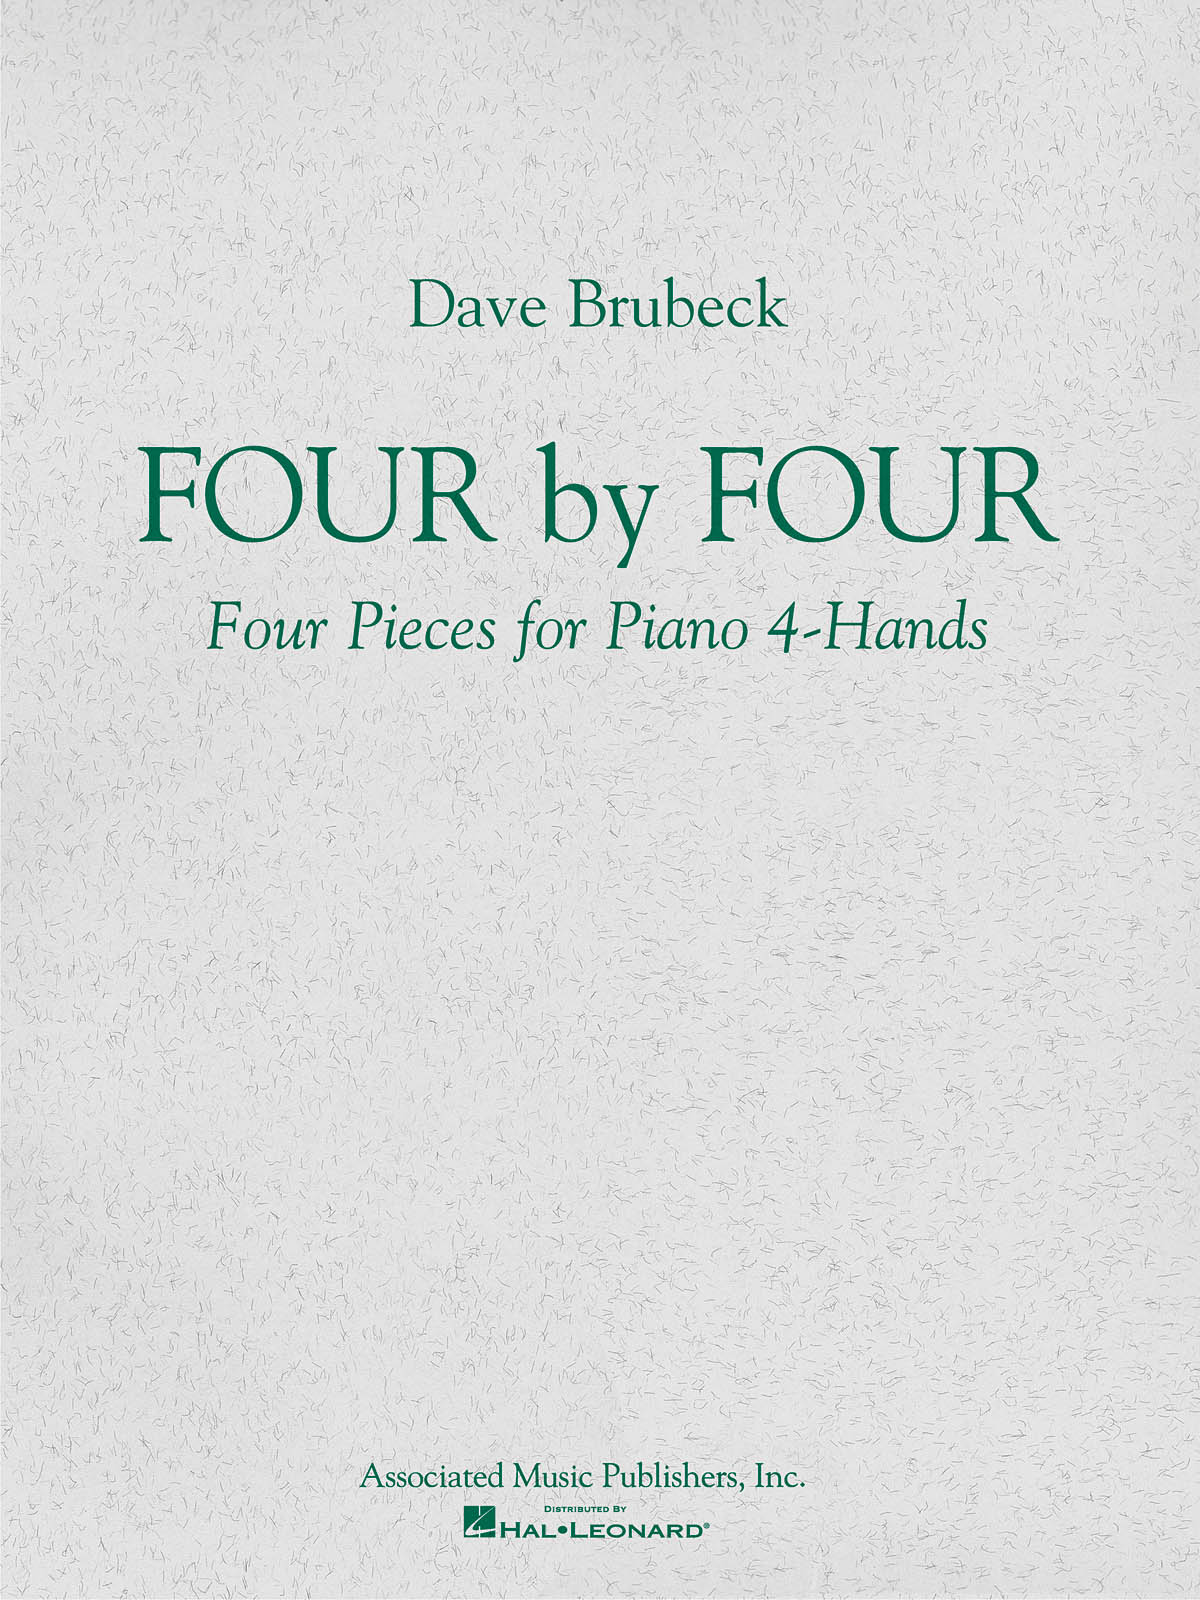 Dave Brubeck: Four by Four